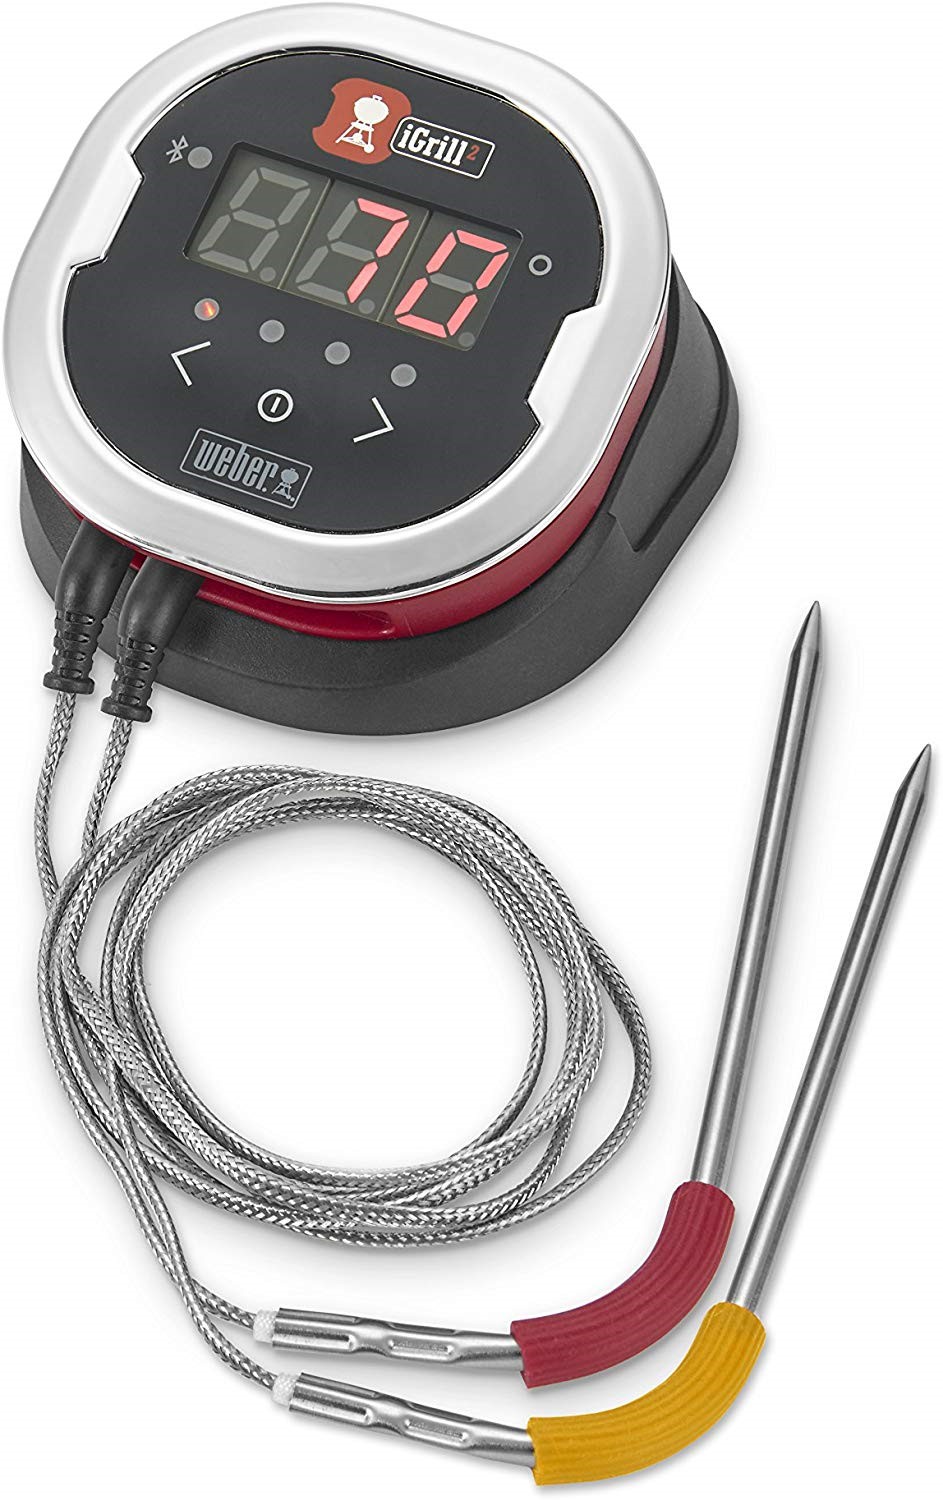 Bluetooth Meat Thermometer - Kitchen Appliances